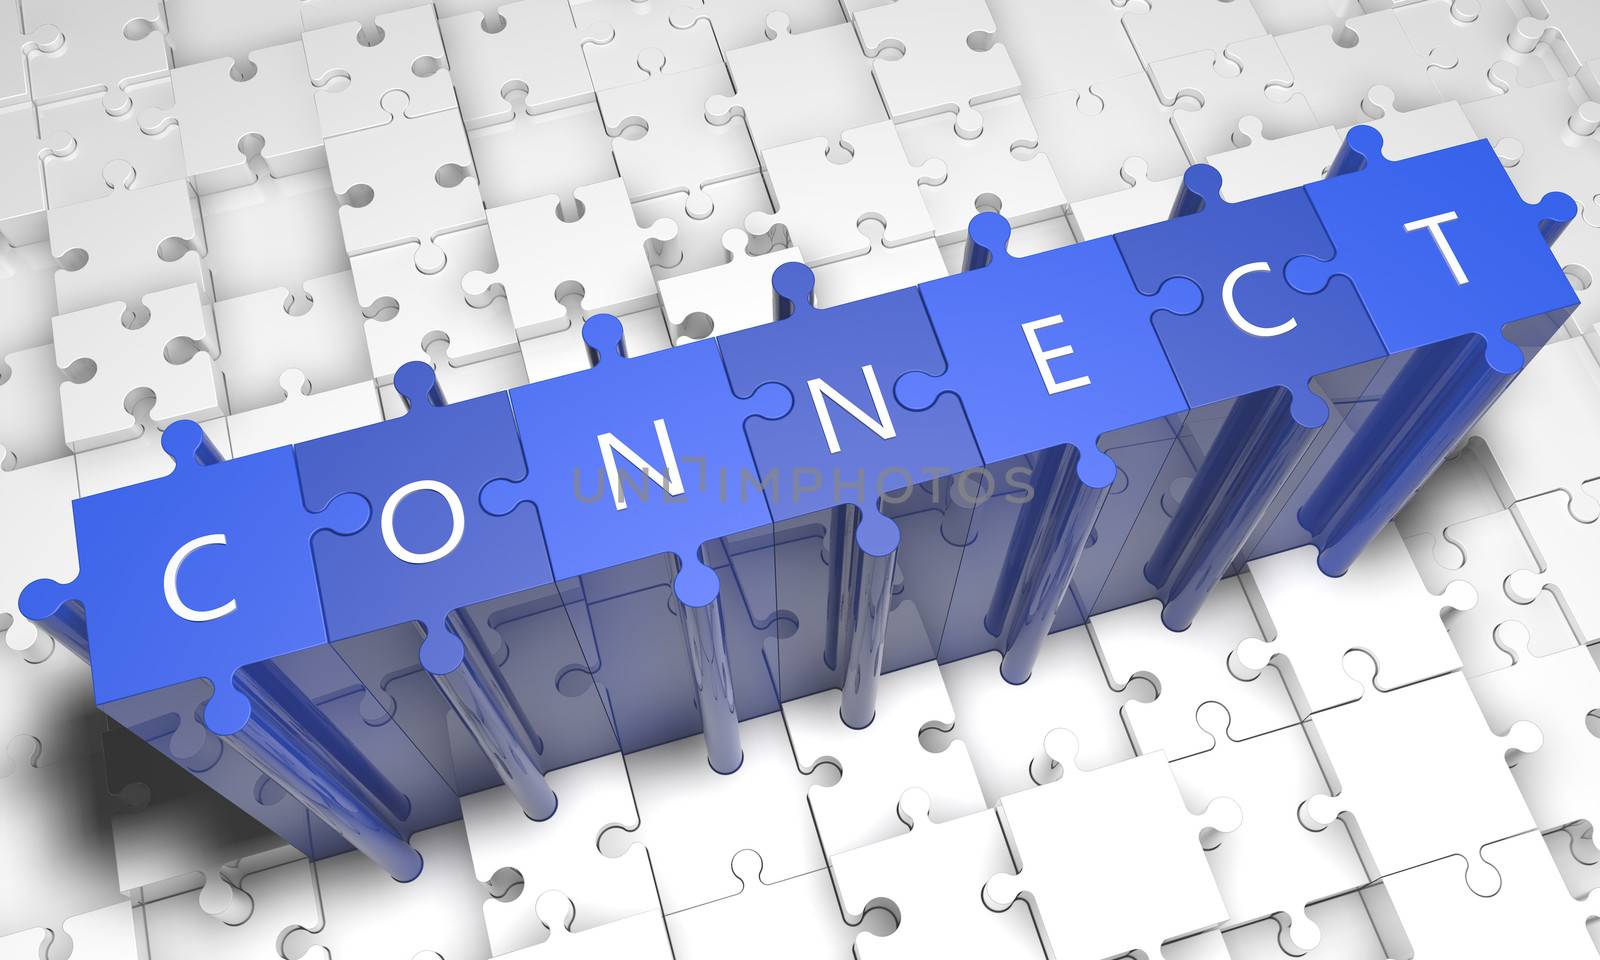 Connect - puzzle 3d render illustration with text on blue jigsaw pieces stick out of white pieces